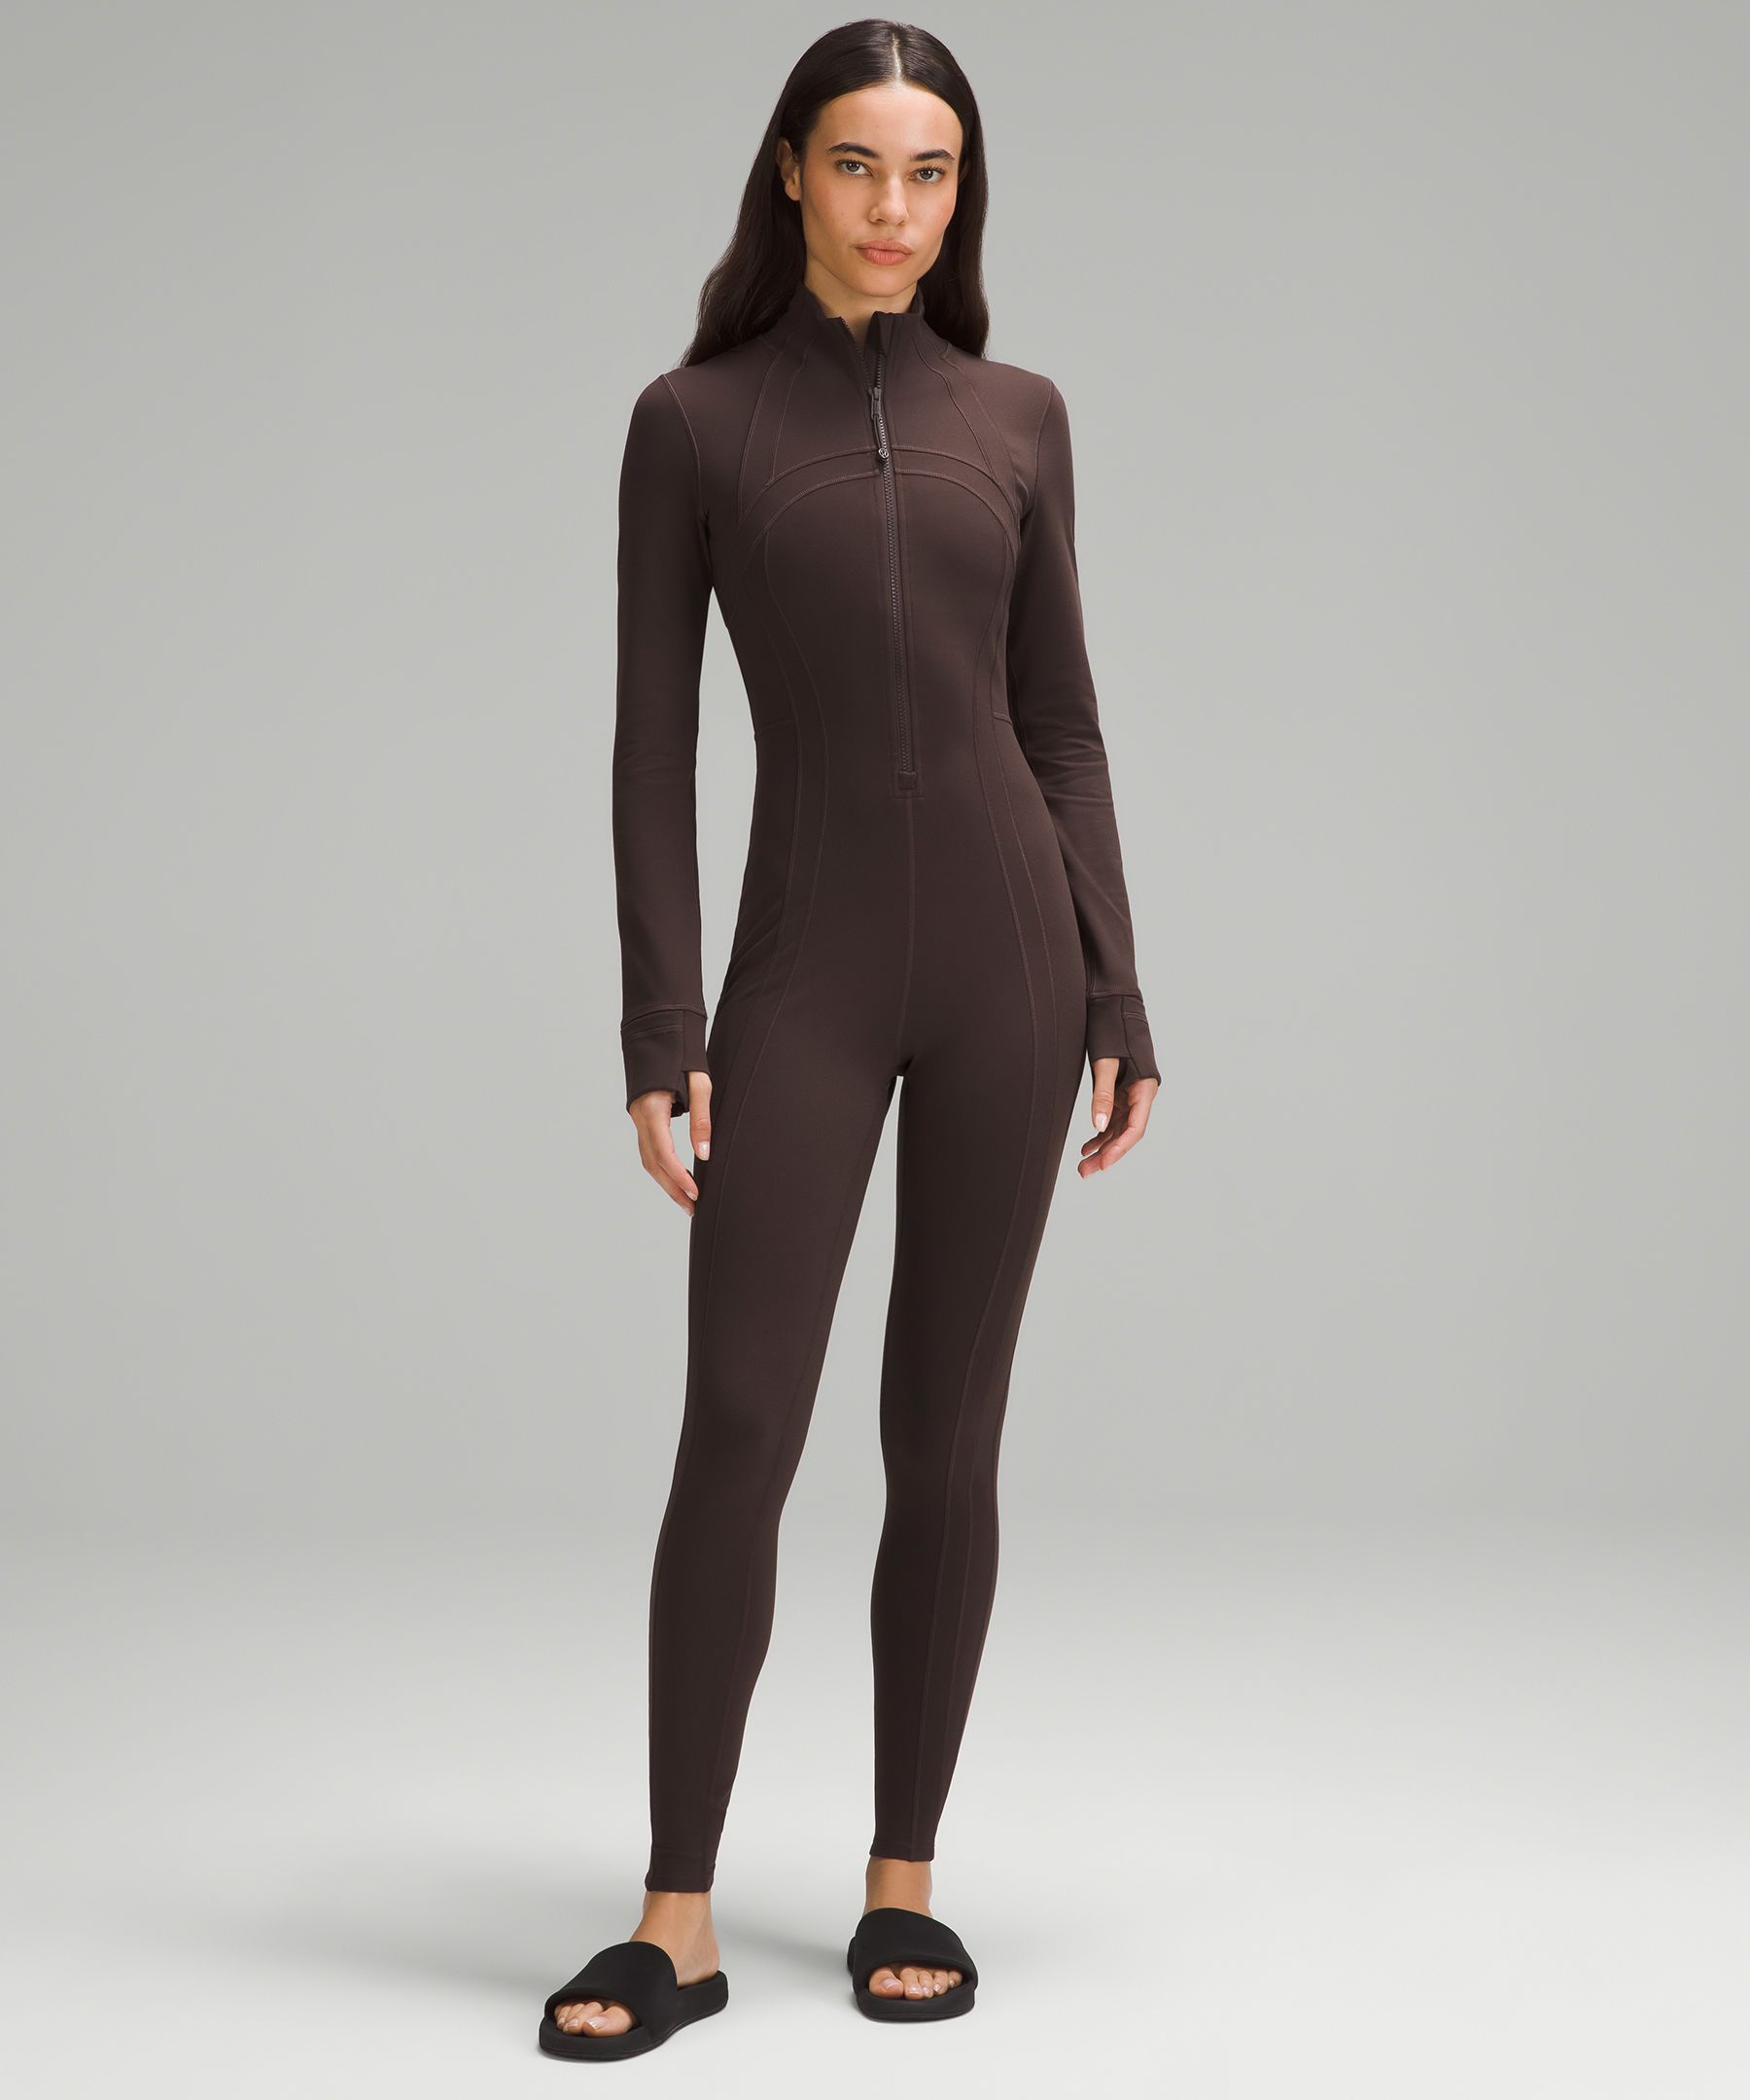 Im wearing the Define Long-Sleeve Bodysuit 6 in the color